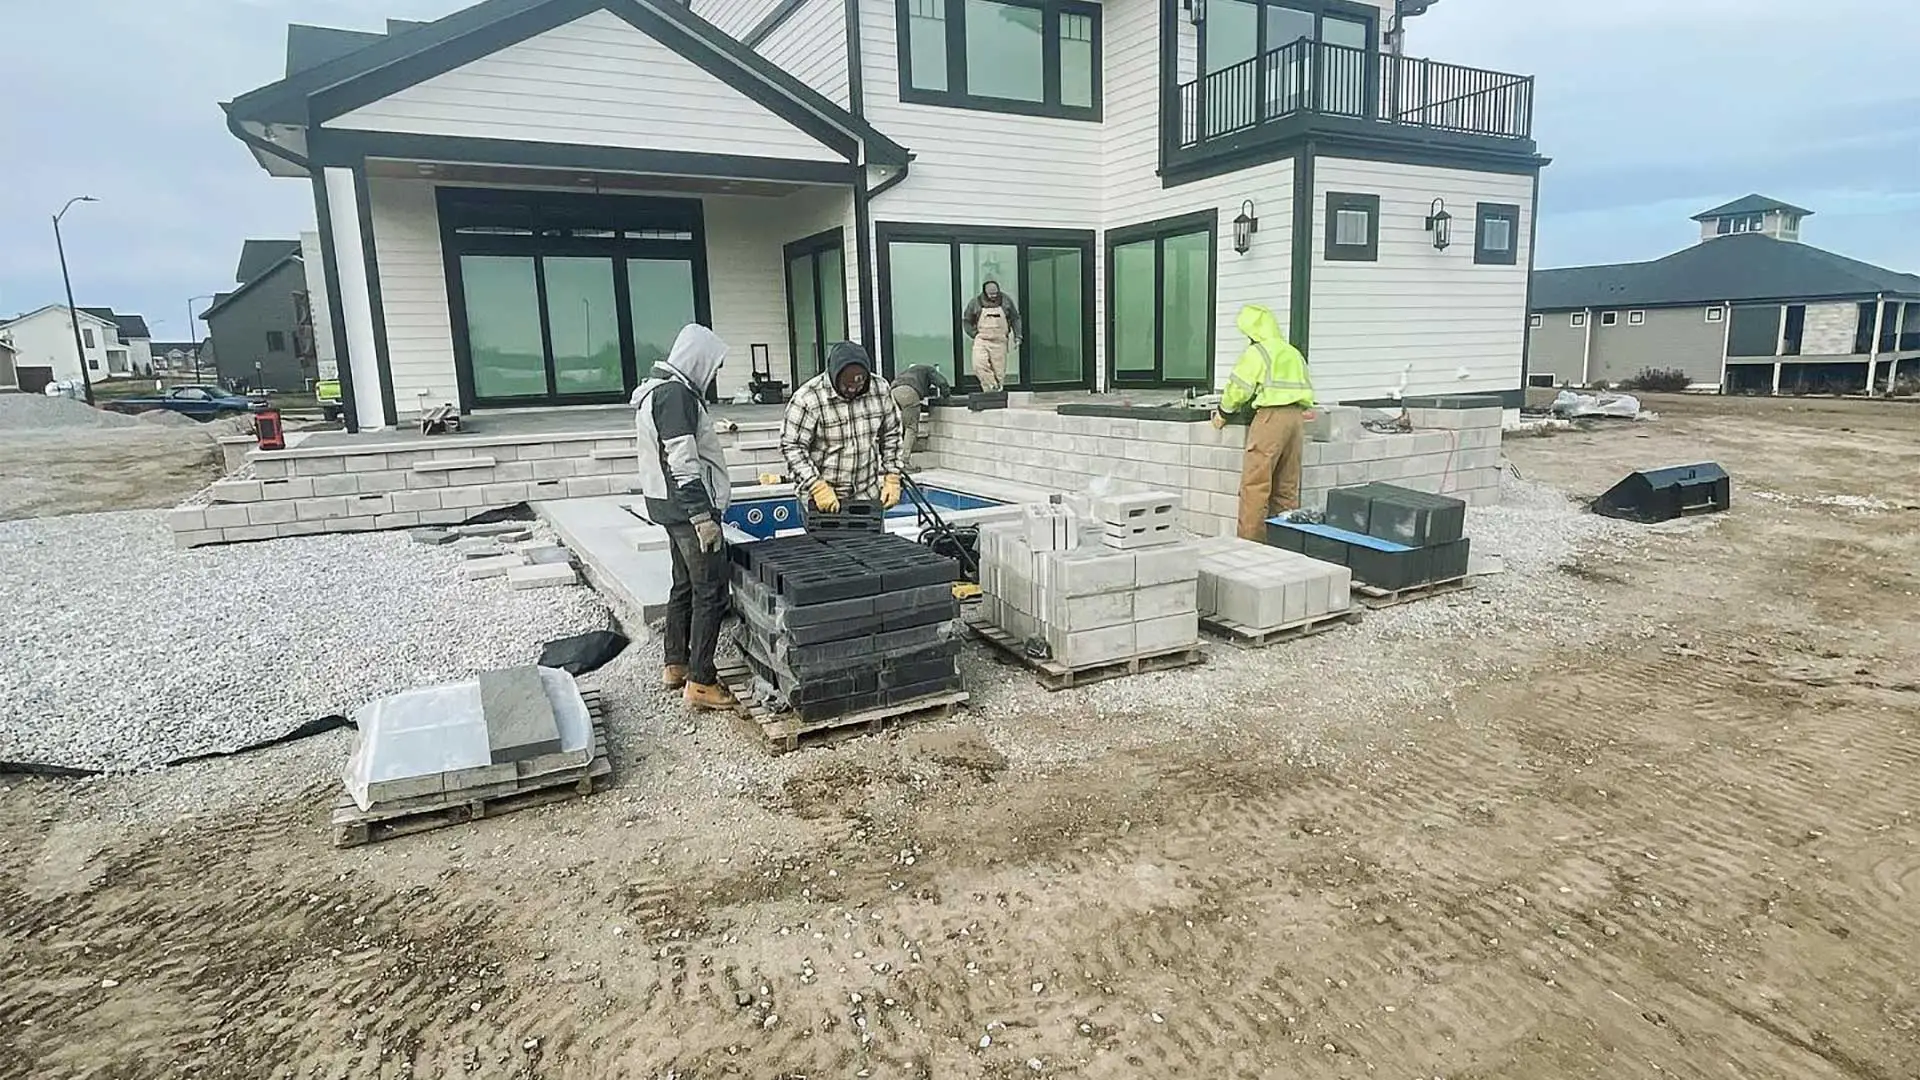 ETCH Outdoor Living crew constructing a patio in Ankeny, IA.